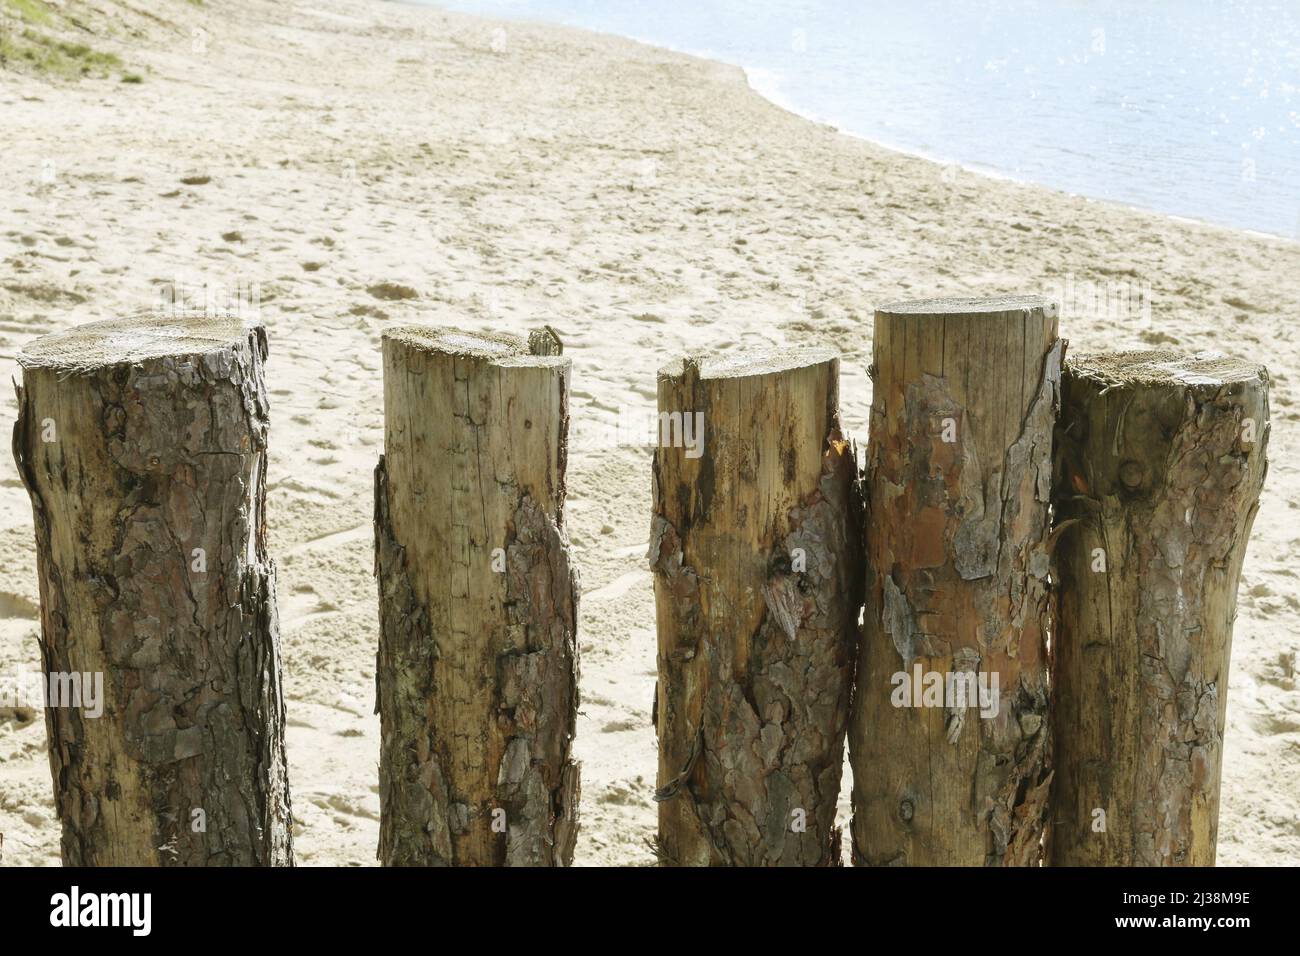 A wooden palisade, sheltered from the wind, on a sandy beach by the sea. Tourists destination Stock Photo